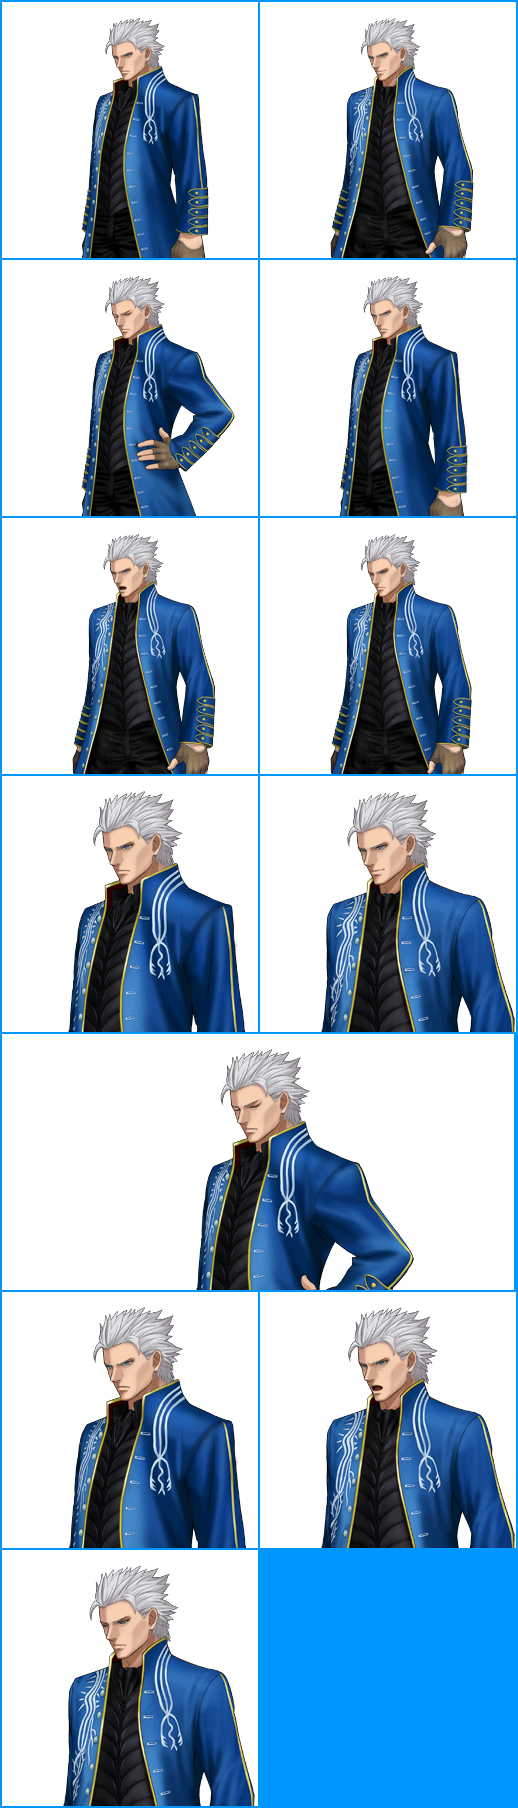 Project X Zone 2 - Vergil